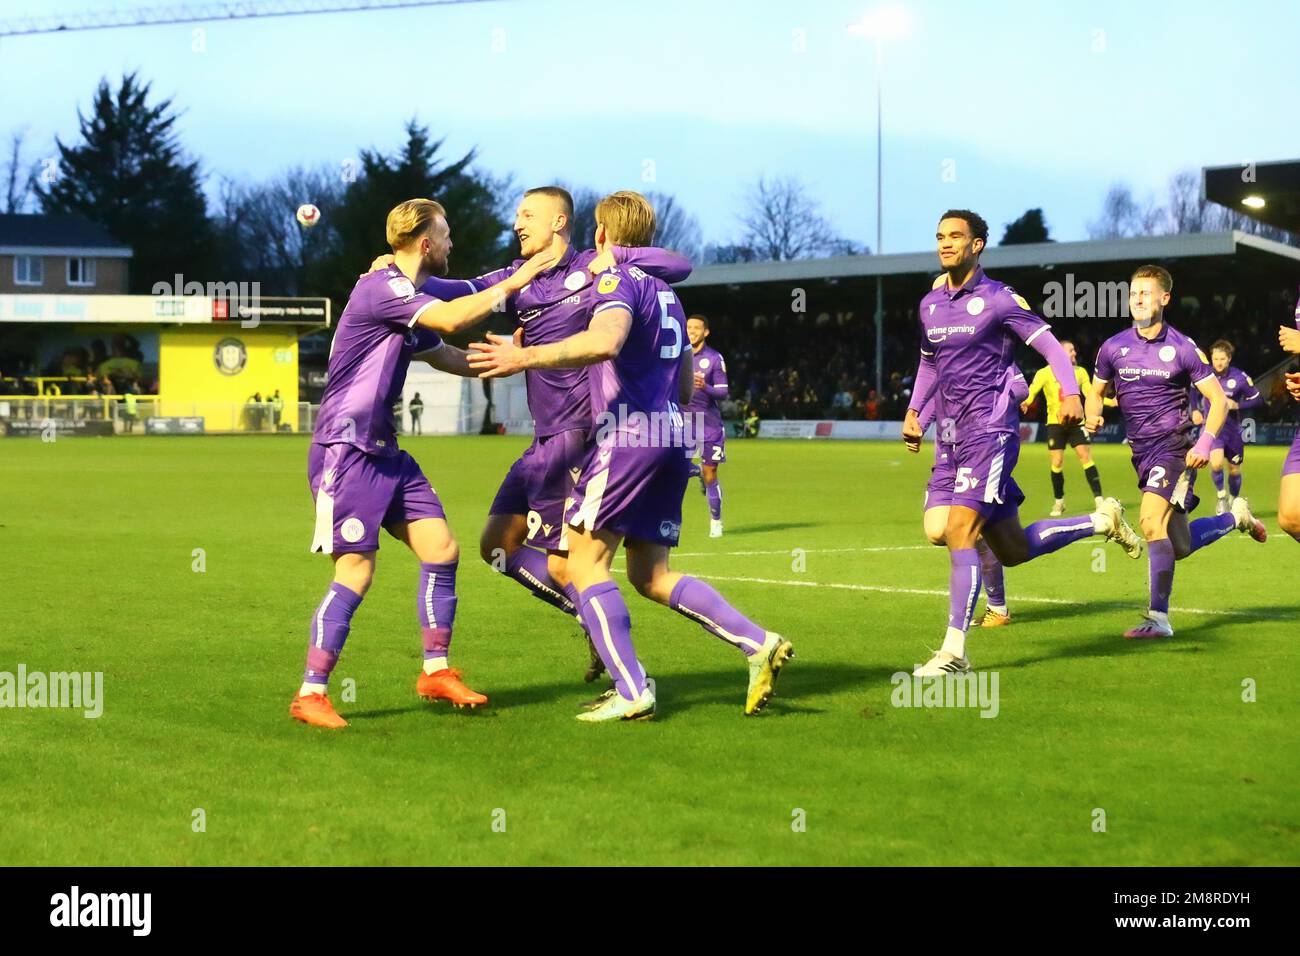 The EnviroVent Stadium, Harrogate, England - 14th January 2023 Carl Piergianni (5) of Stevenage is mobbed by his team mates after he scored the opening goal - during the game Harrogate Town v Stevenage, EFL League 2, 2022/23, at The EnviroVent Stadium, Harrogate, England - 14th January 2023  Credit: Arthur Haigh/WhiteRosePhotos/Alamy Live News Stock Photo